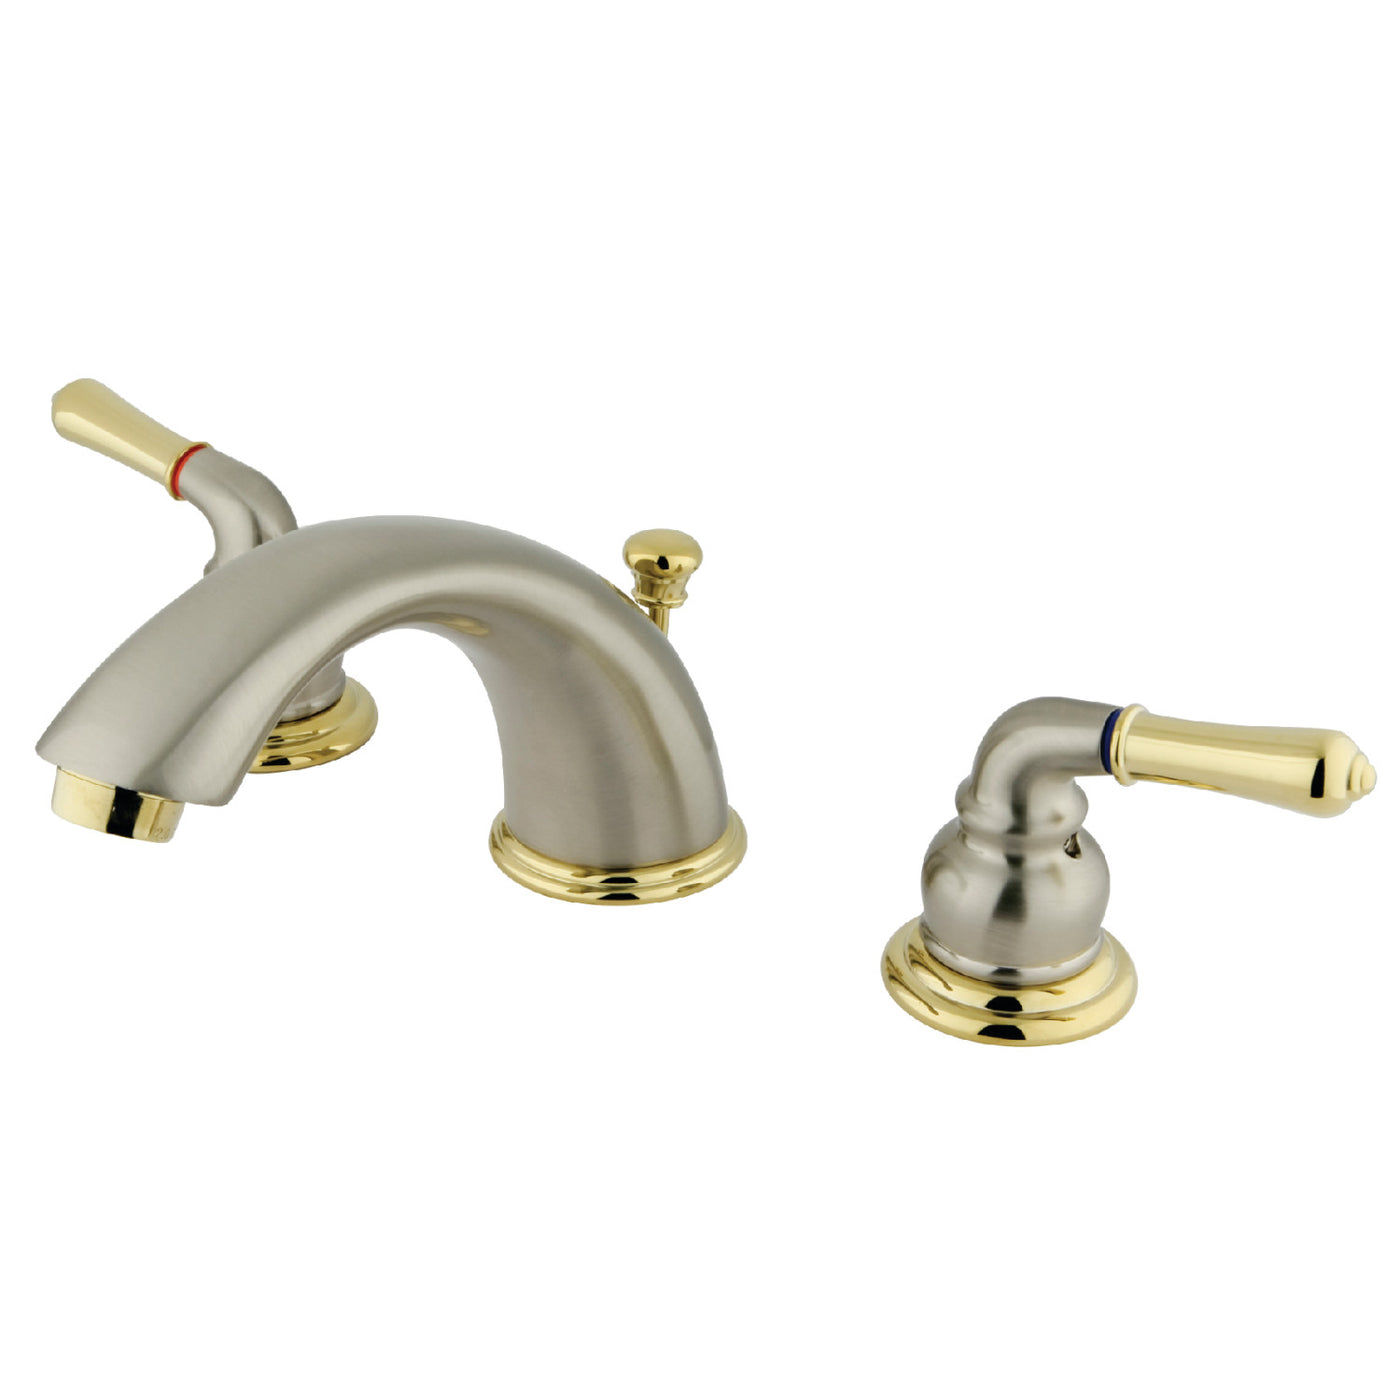 Elements of Design EB969 Widespread Bathroom Faucet with Retail Pop-Up, Brushed Nickel/Polished Brass